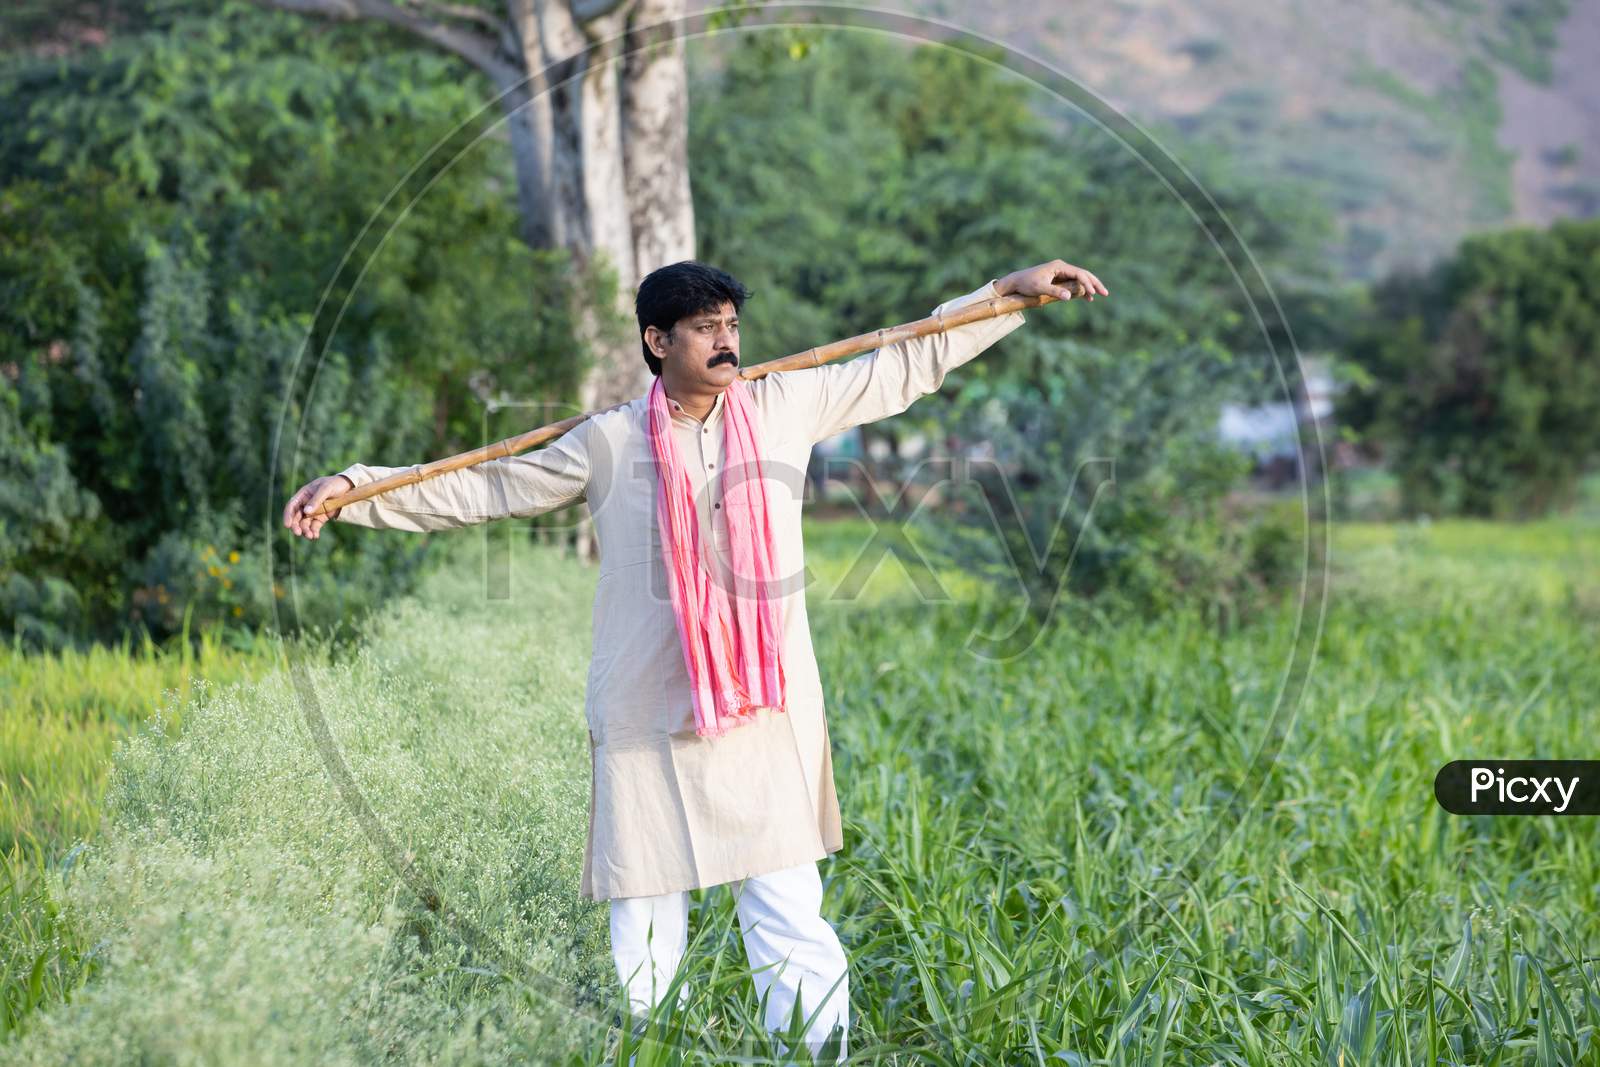 Indian Farmer Holding Wood Stick In Hand Standing In Agriculture Field Wearing Traditional Kurta Dress, Man With Mustache And Black Hair. Rural India Concept.